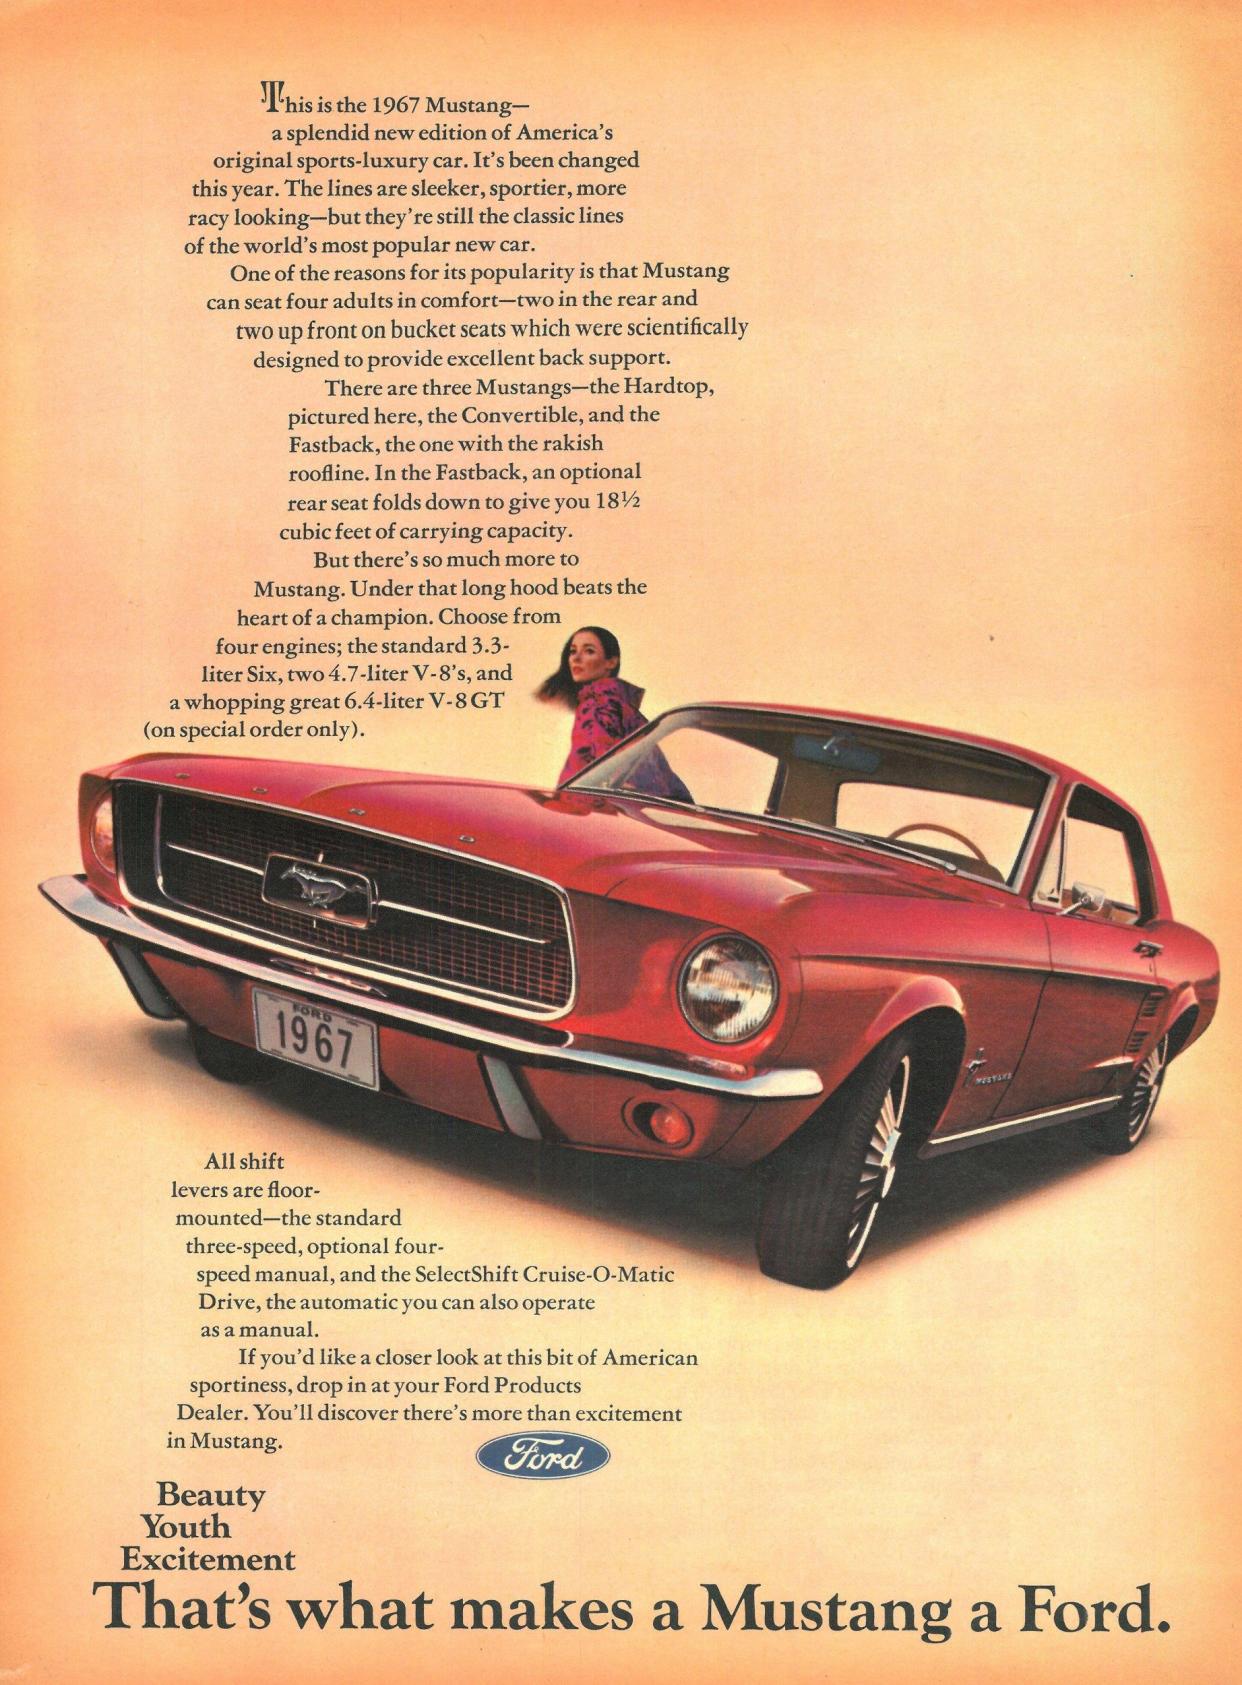 A Ford Mustang advert in Life Magazine, April 1967